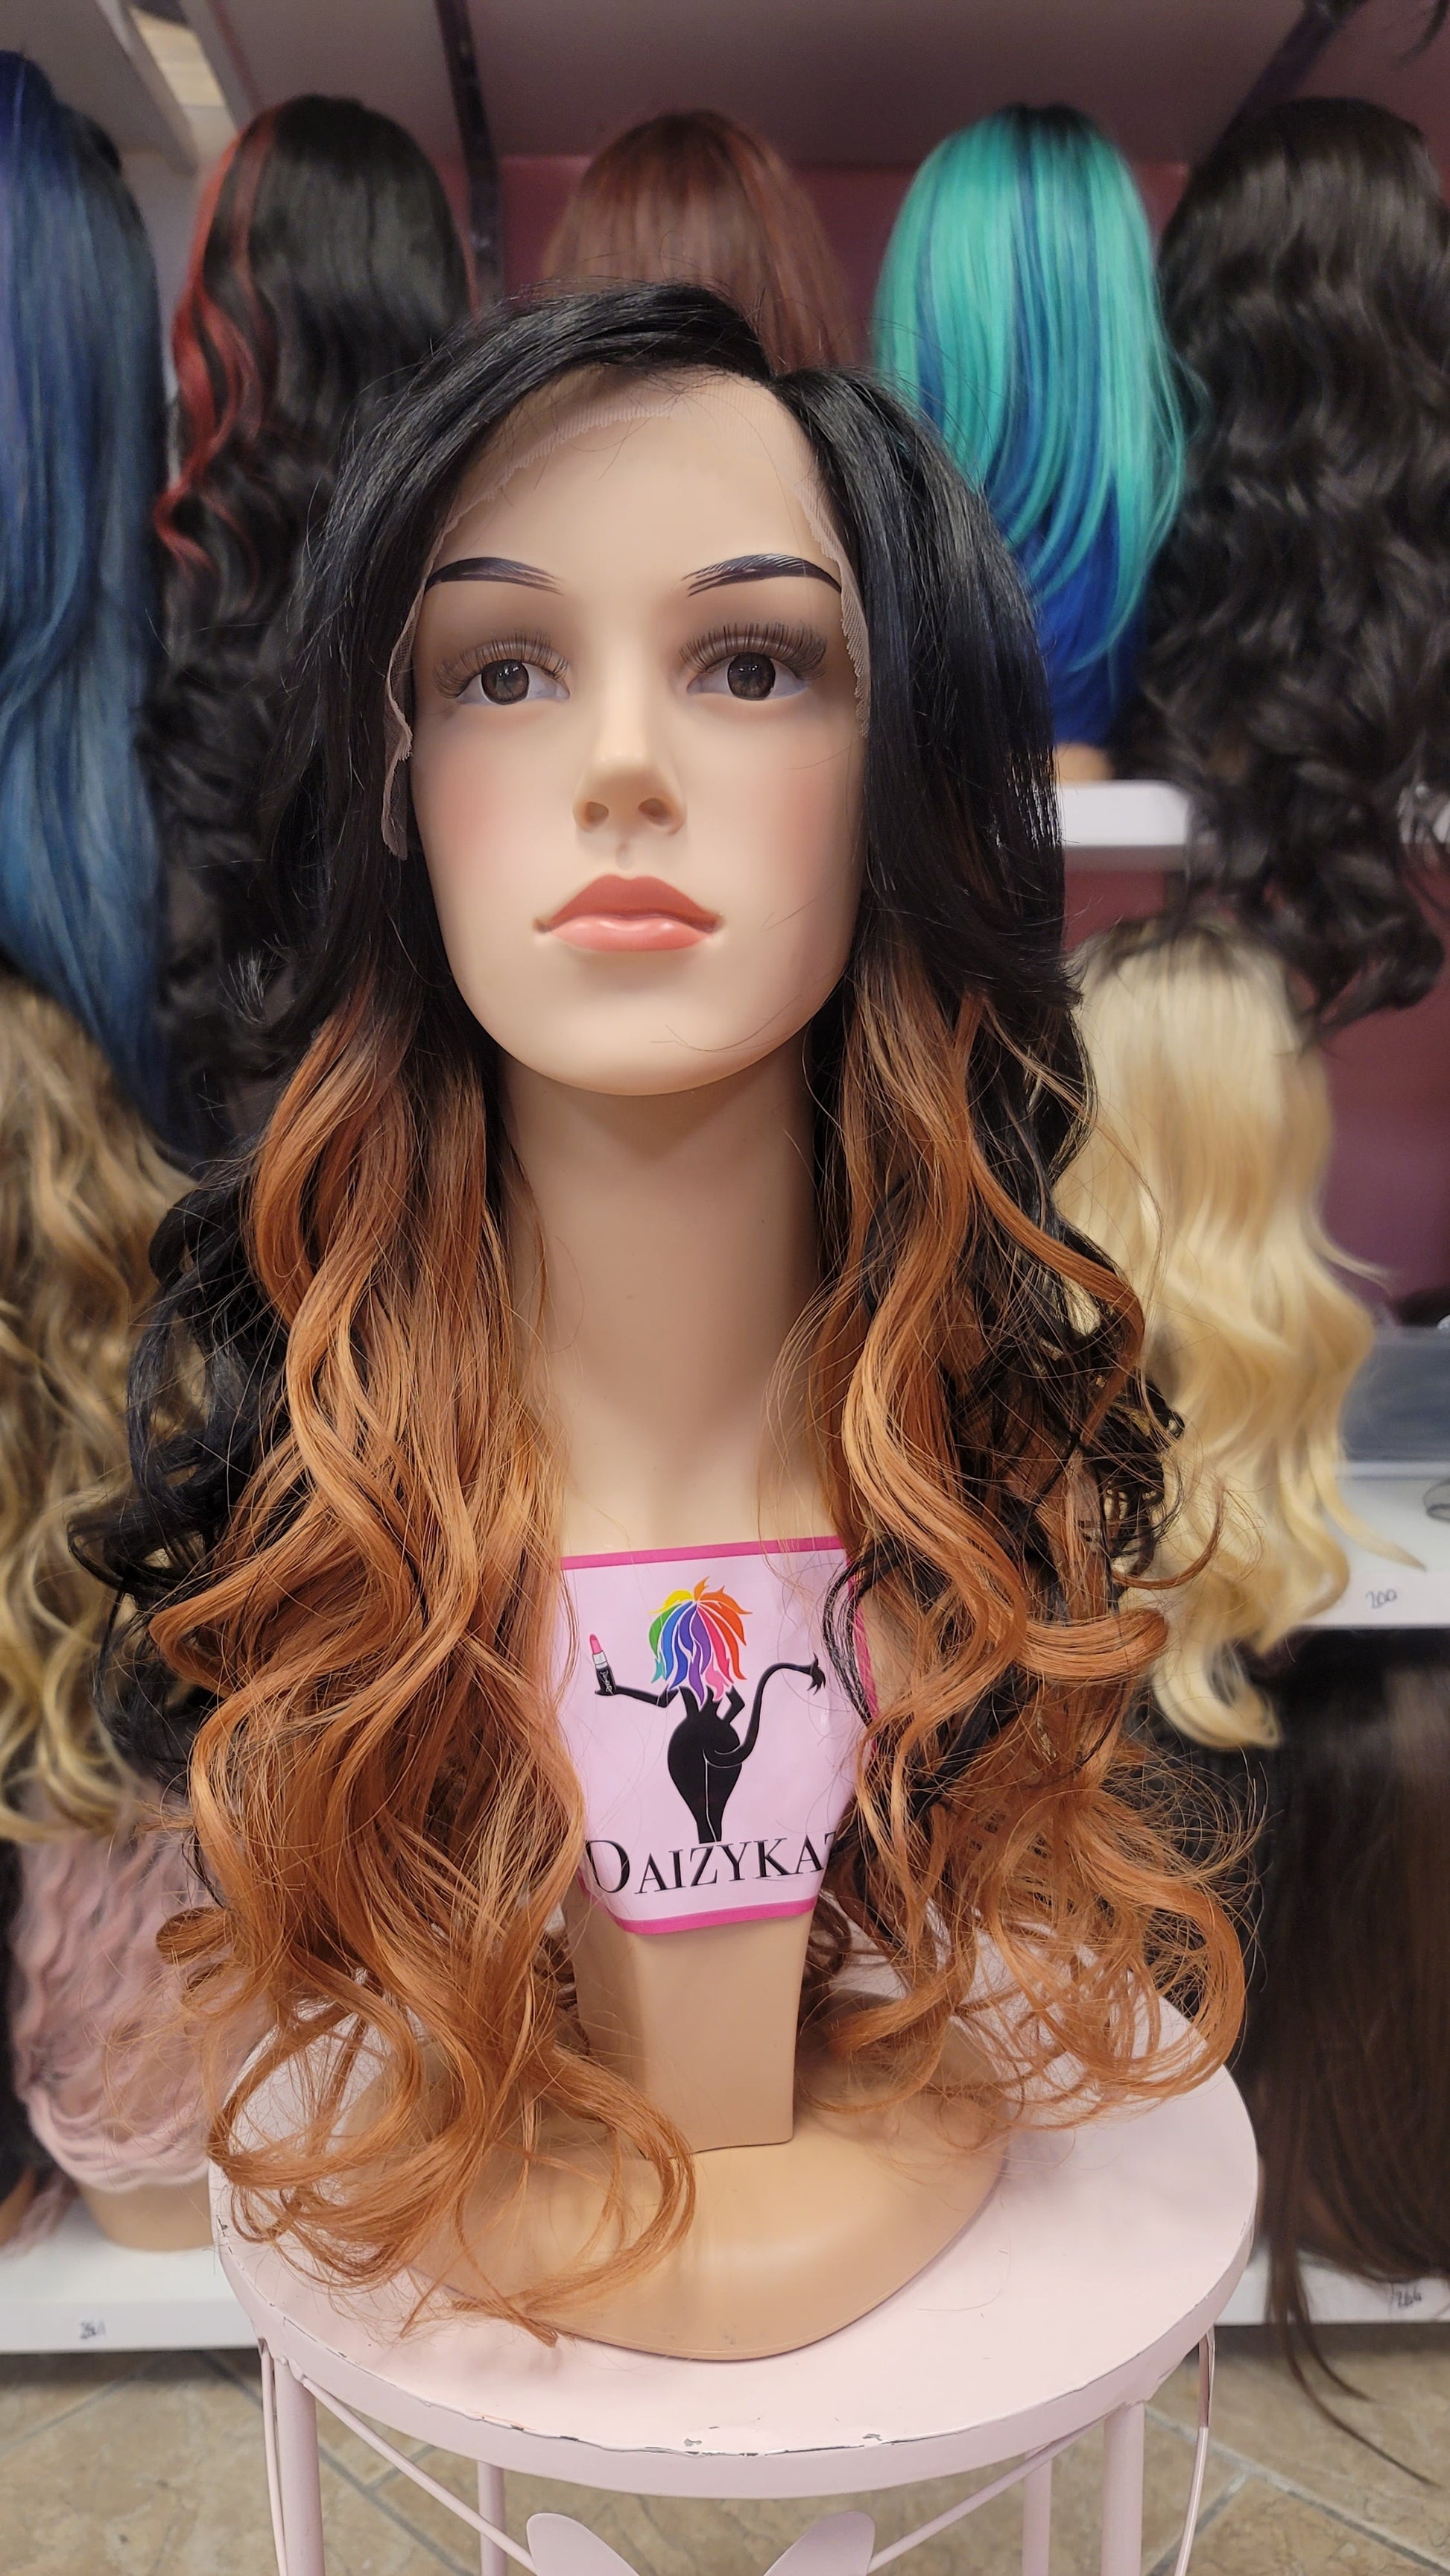 480 Bella - Side Part Lace Front Wig - 1B/30 - DaizyKat Cosmetics 480 Bella - Side Part Lace Front Wig - 1B/30 DaizyKat Cosmetics Wigs